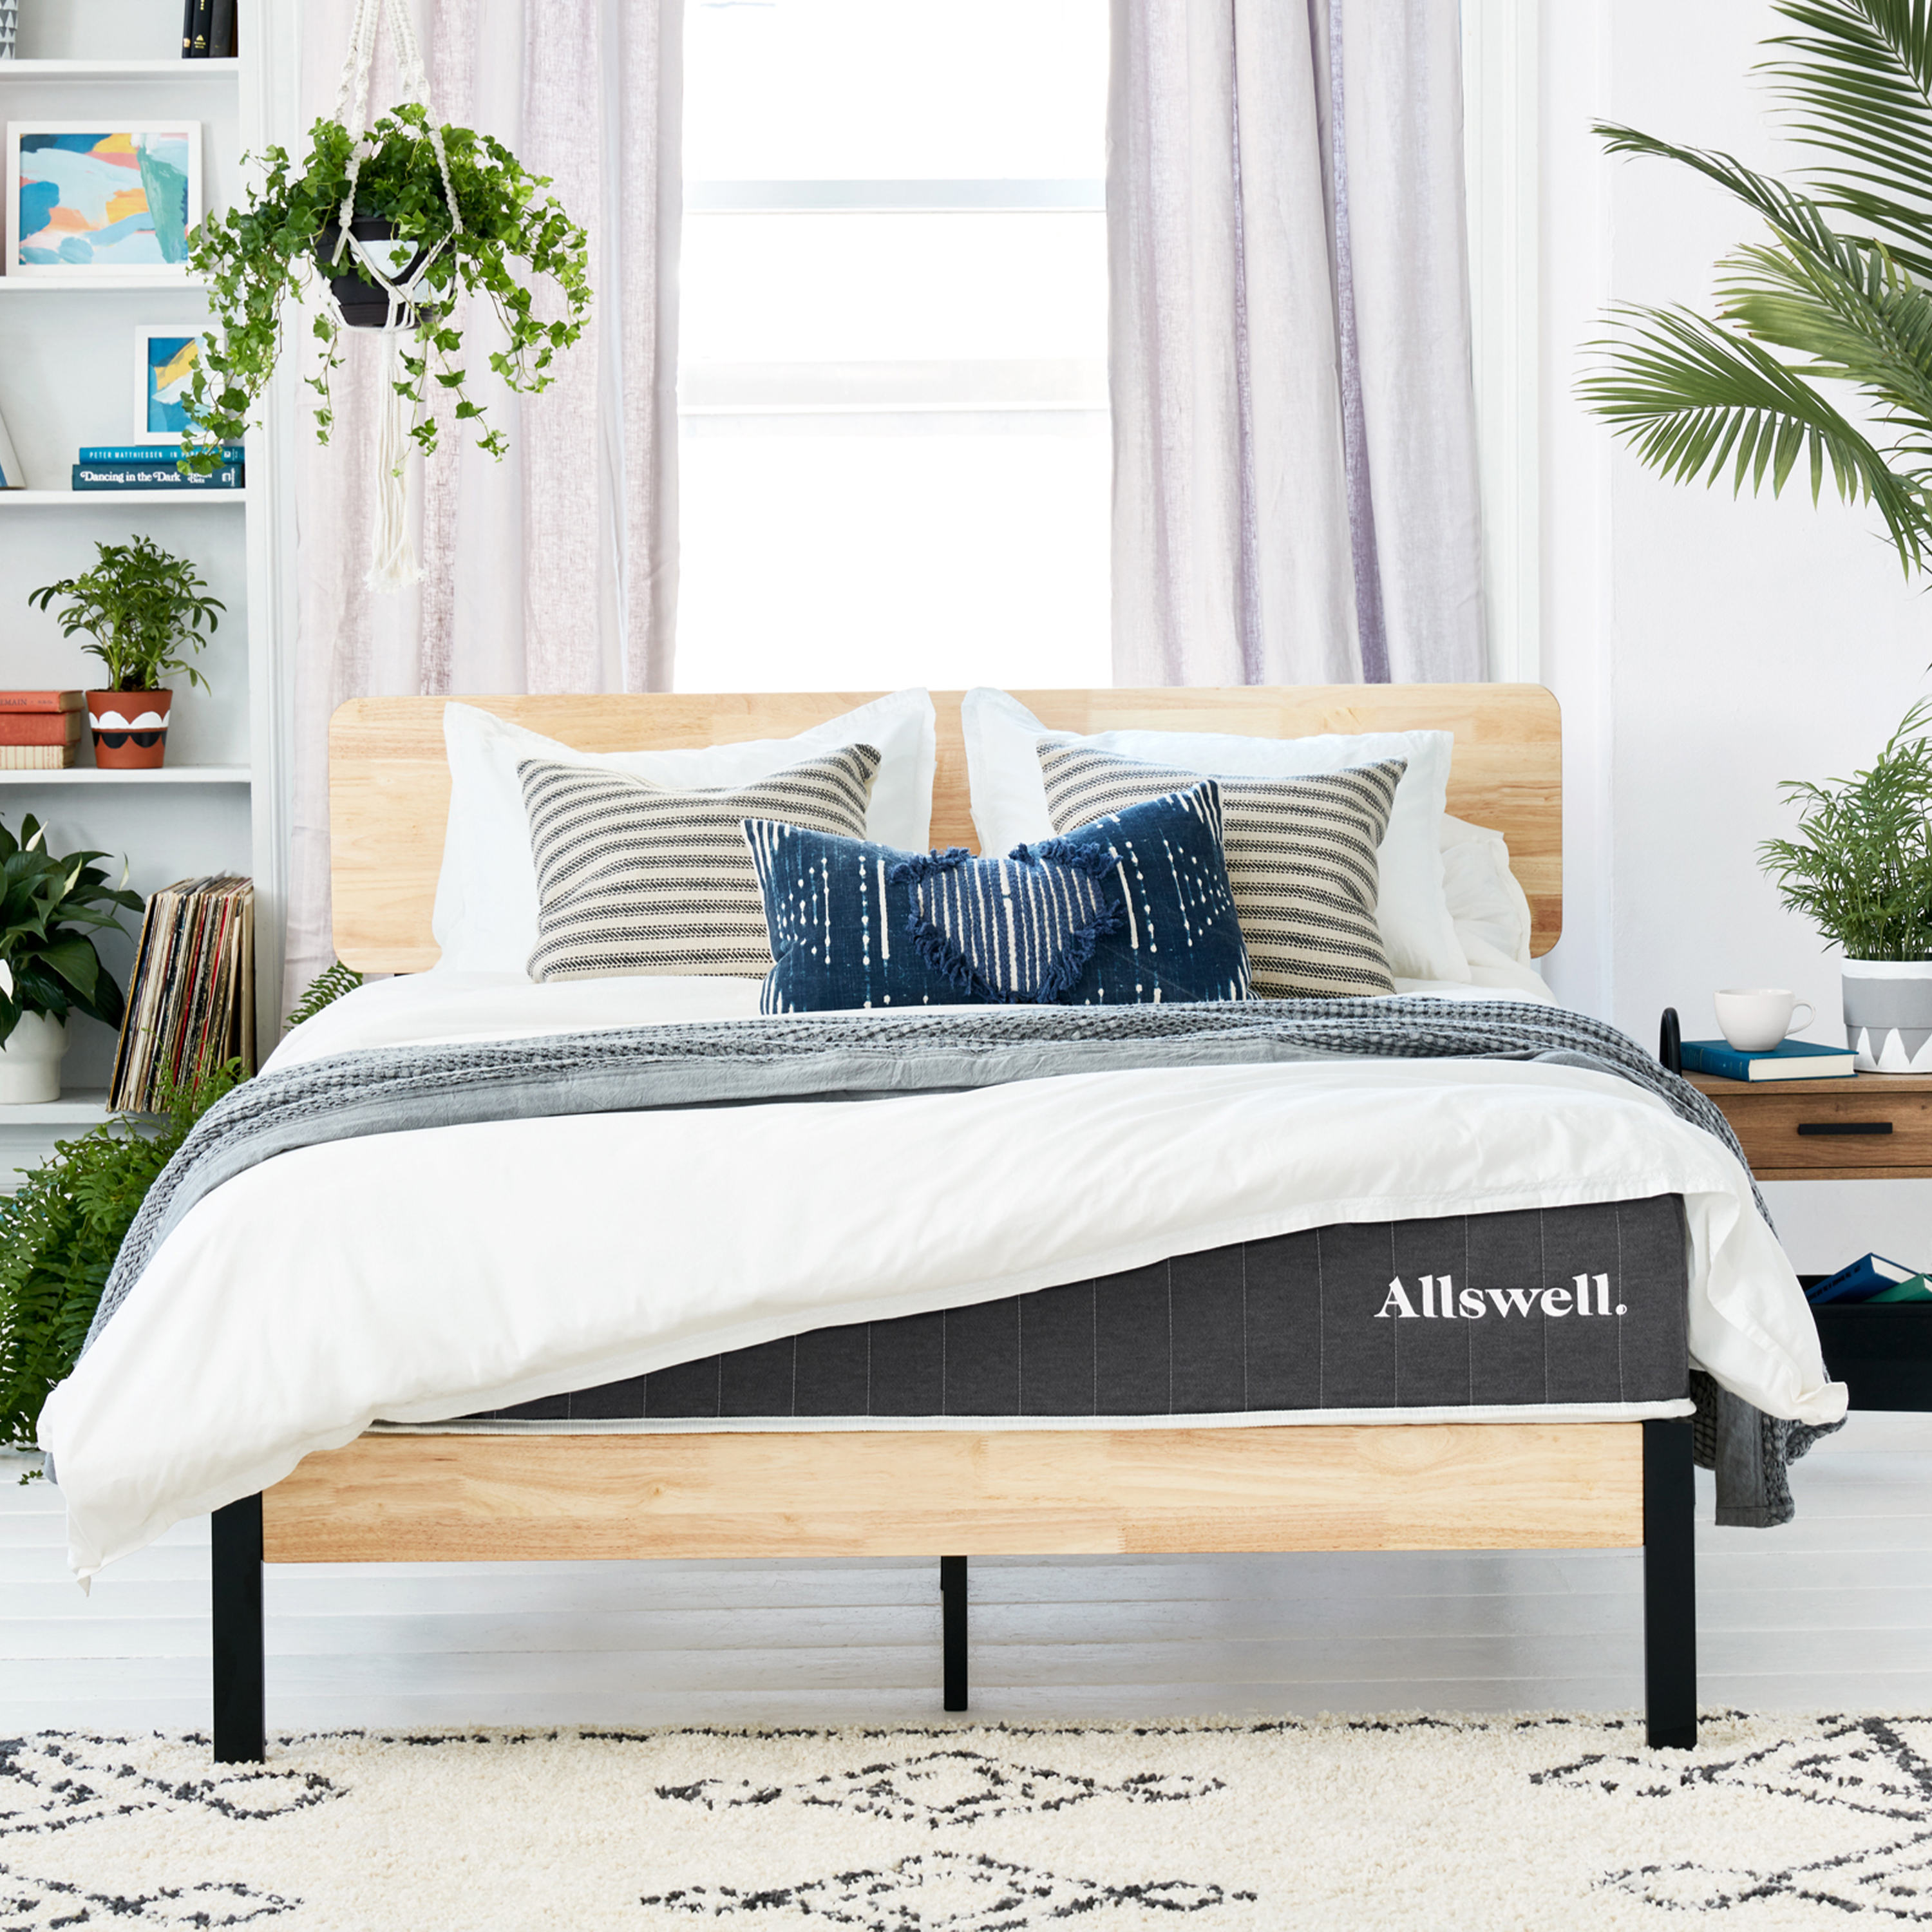 The Original Allswell 10" Bed in a Box Hybrid Mattress, Queen - image 3 of 8